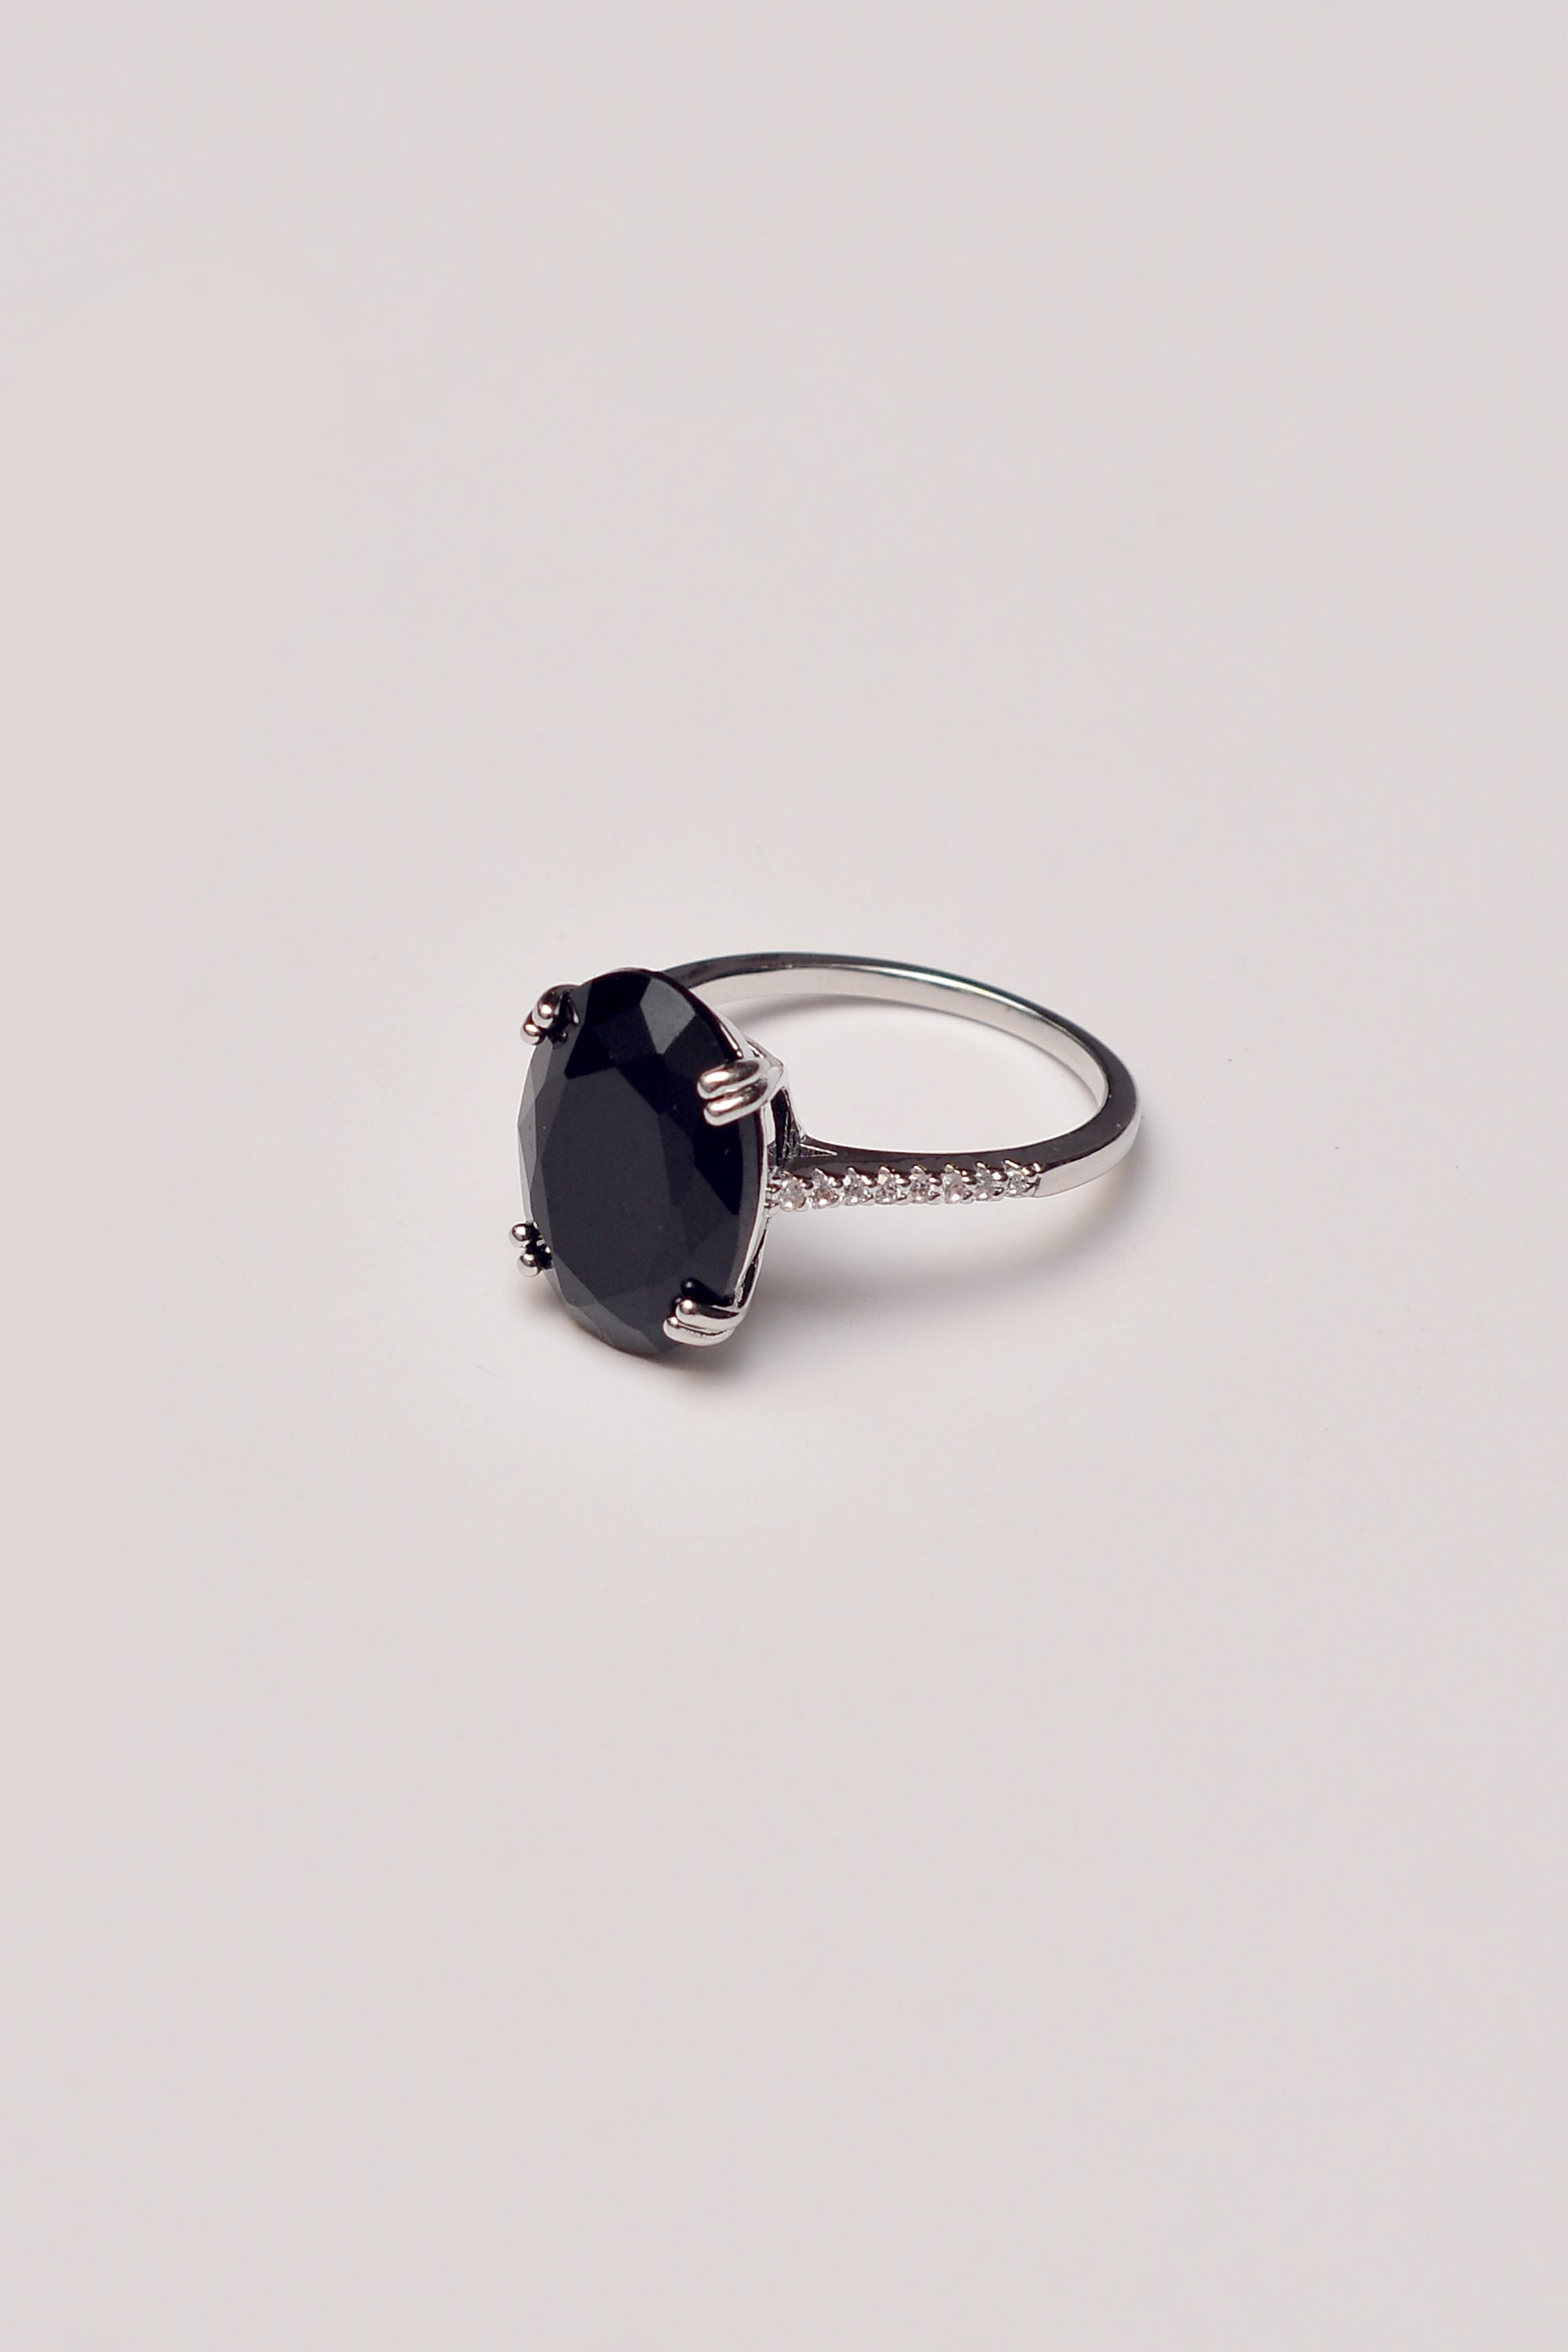 Size 7 Daily Wear Black Ring